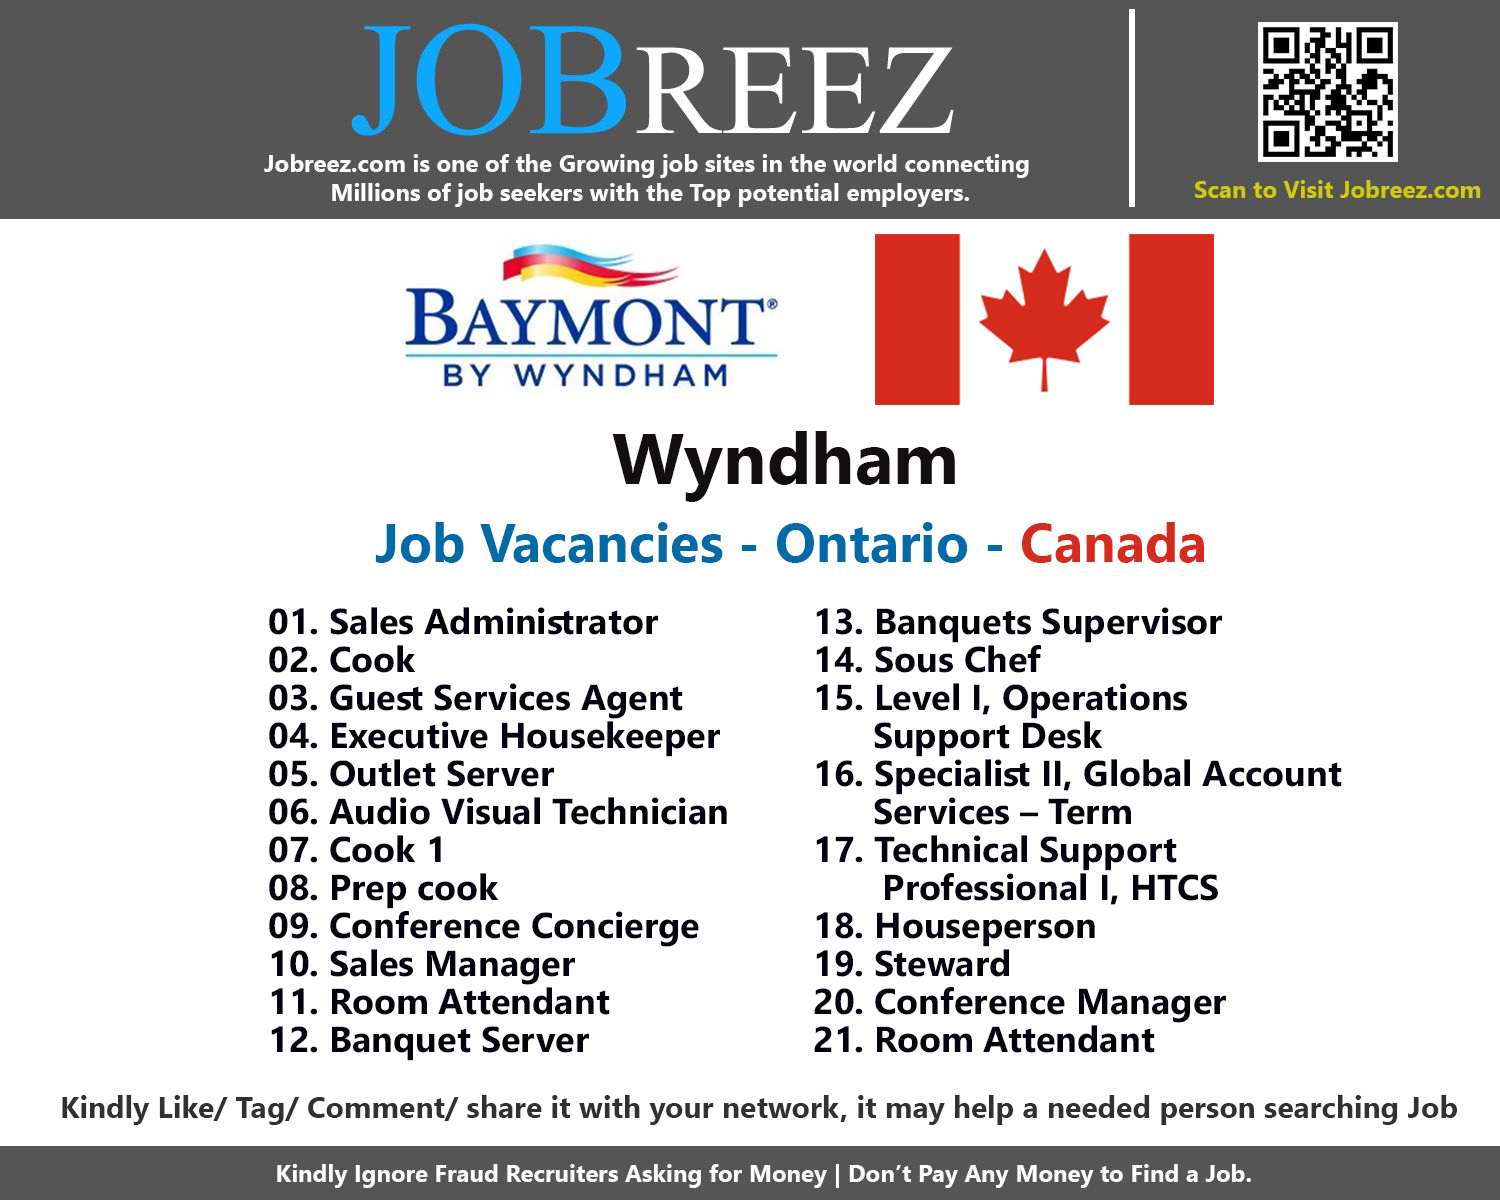 Wyndham Job Vacancies - Ontario - Canada. Also, We are going to describe to you the ways to get a job in Wyndham Job Vacancies - Ontario - Canada.